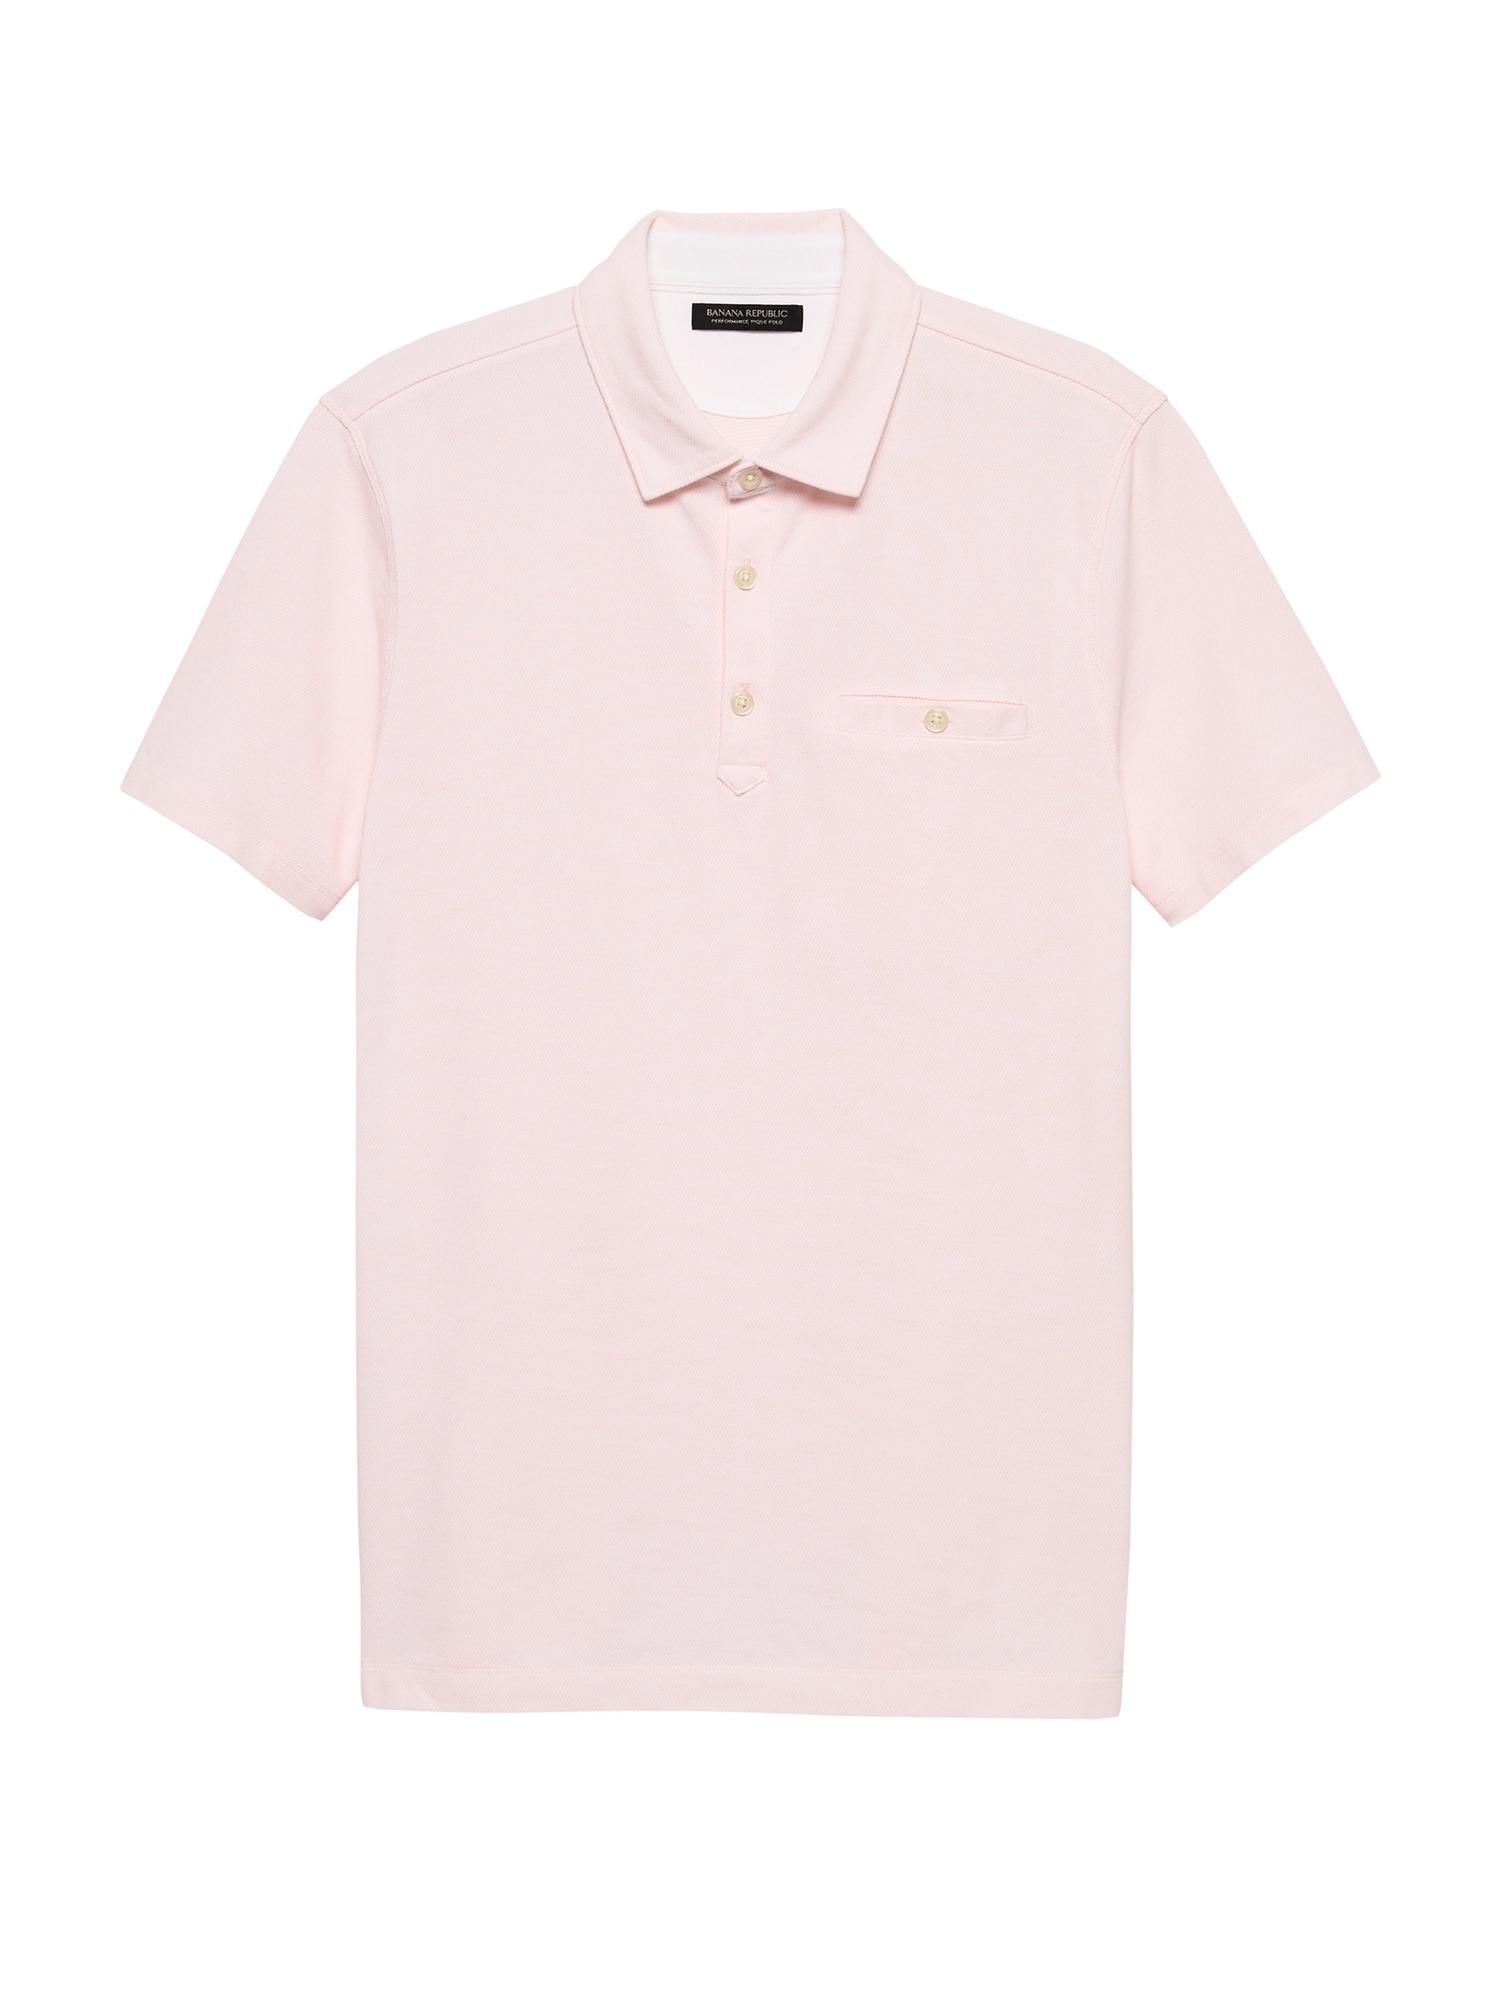 Don't-Sweat-It Polo